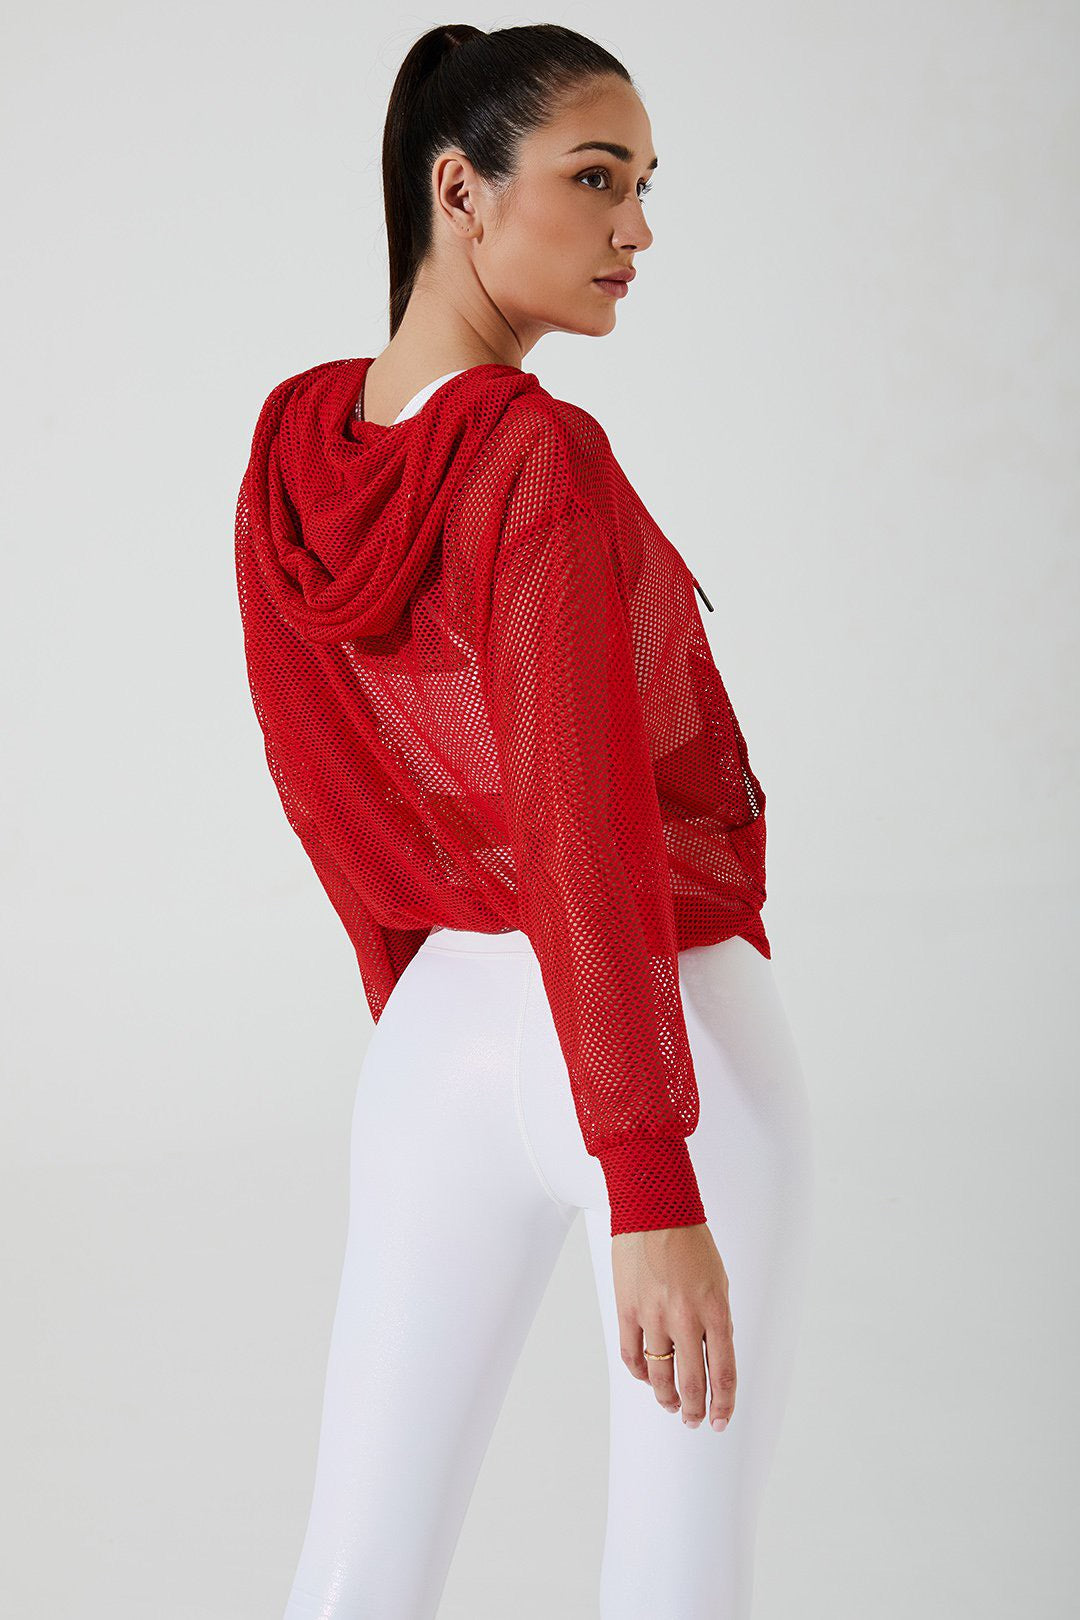 Stylish women's goji berry red hoodie with mesh design, perfect for casual wear.